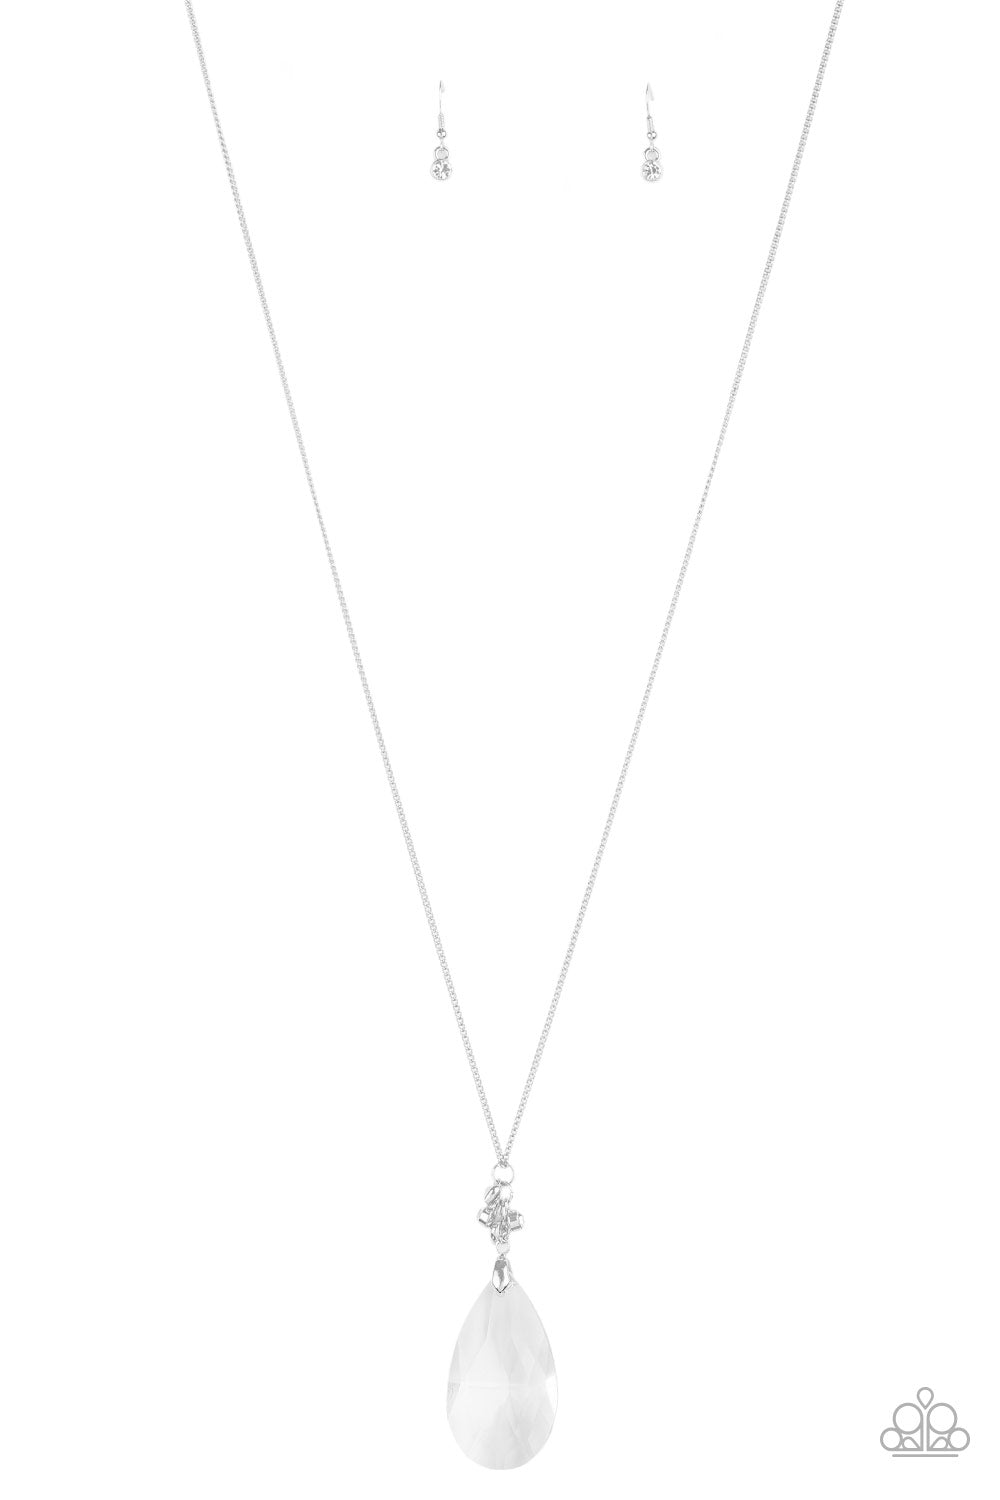 UP IN THE HEIR - WHITE TEARDROP CRYSTAL LIFE OF THE PARTY NECKLACE